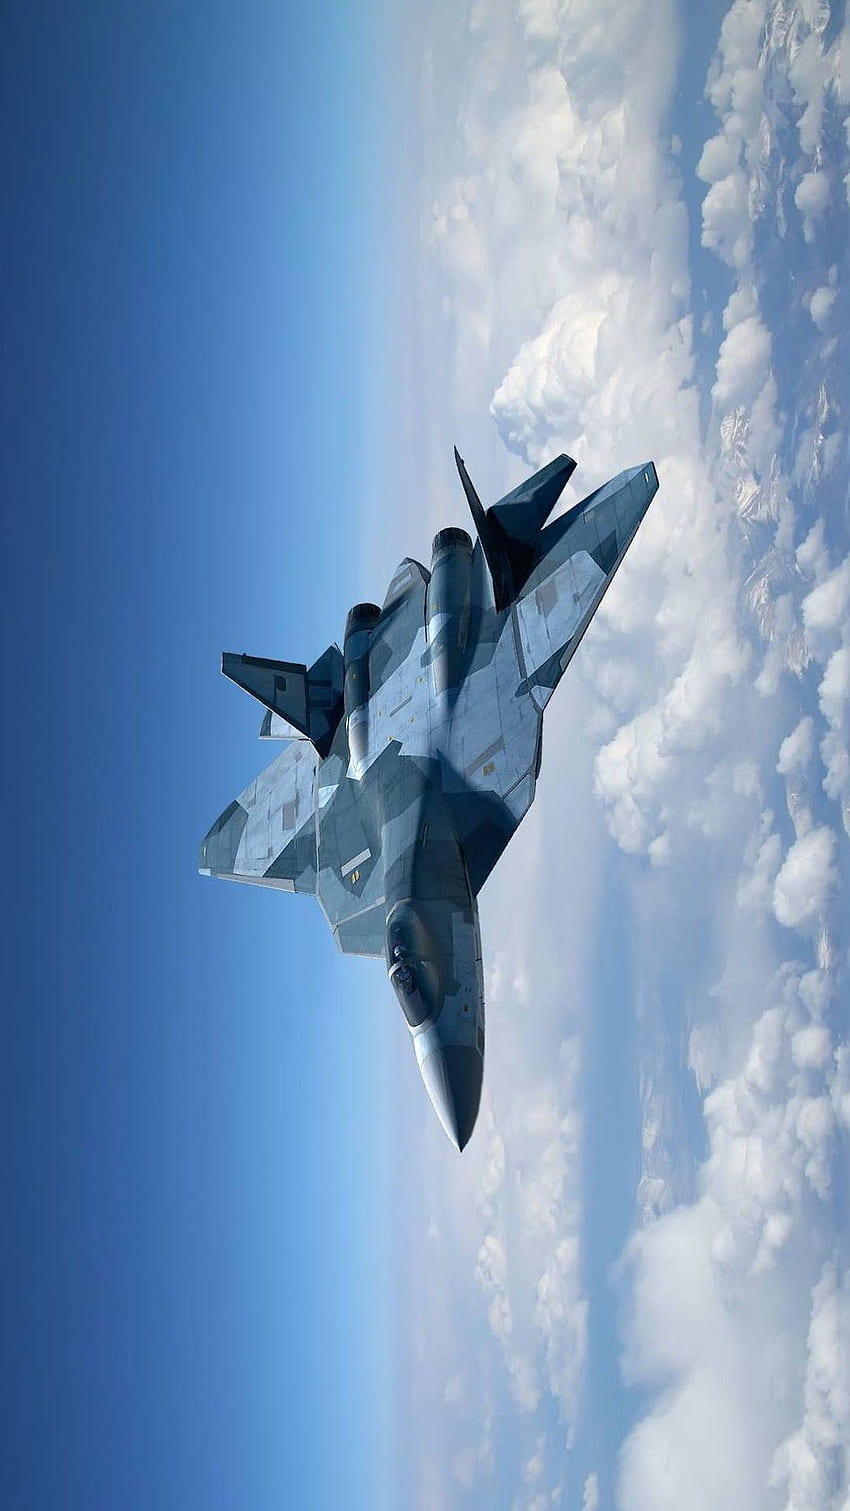 1080x1920 Sukhoi su 57 Wallpapers for IPhone 6S 7 8 Retina HD